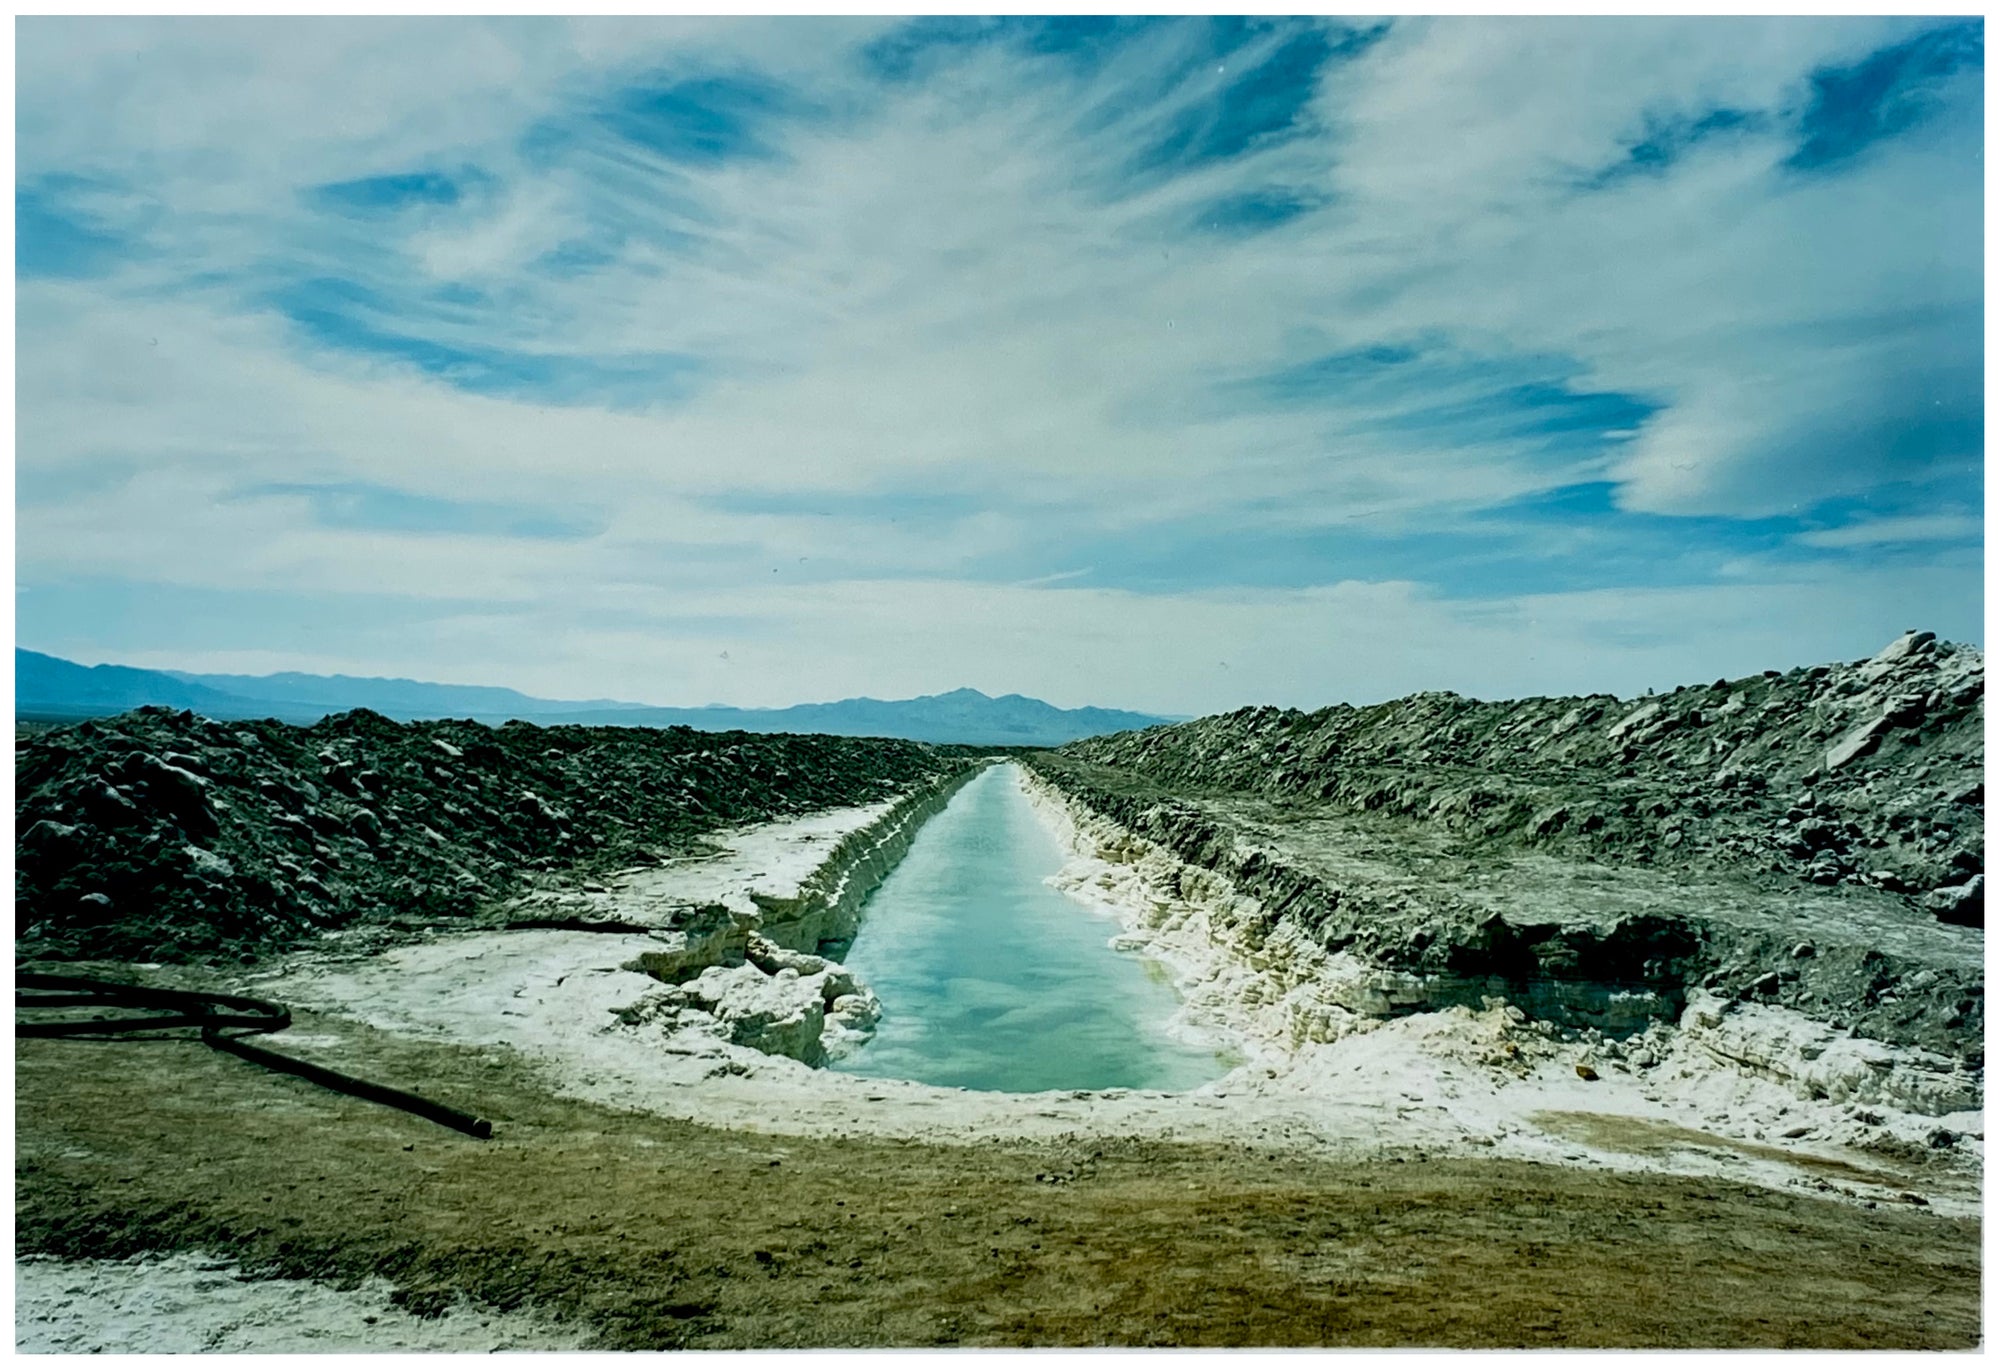 Photograph by Richard Heeps. A watery white trench is dug into the centre going into the distance with grey mounds of earth either side. The sky is vast and blue, with light clouds.